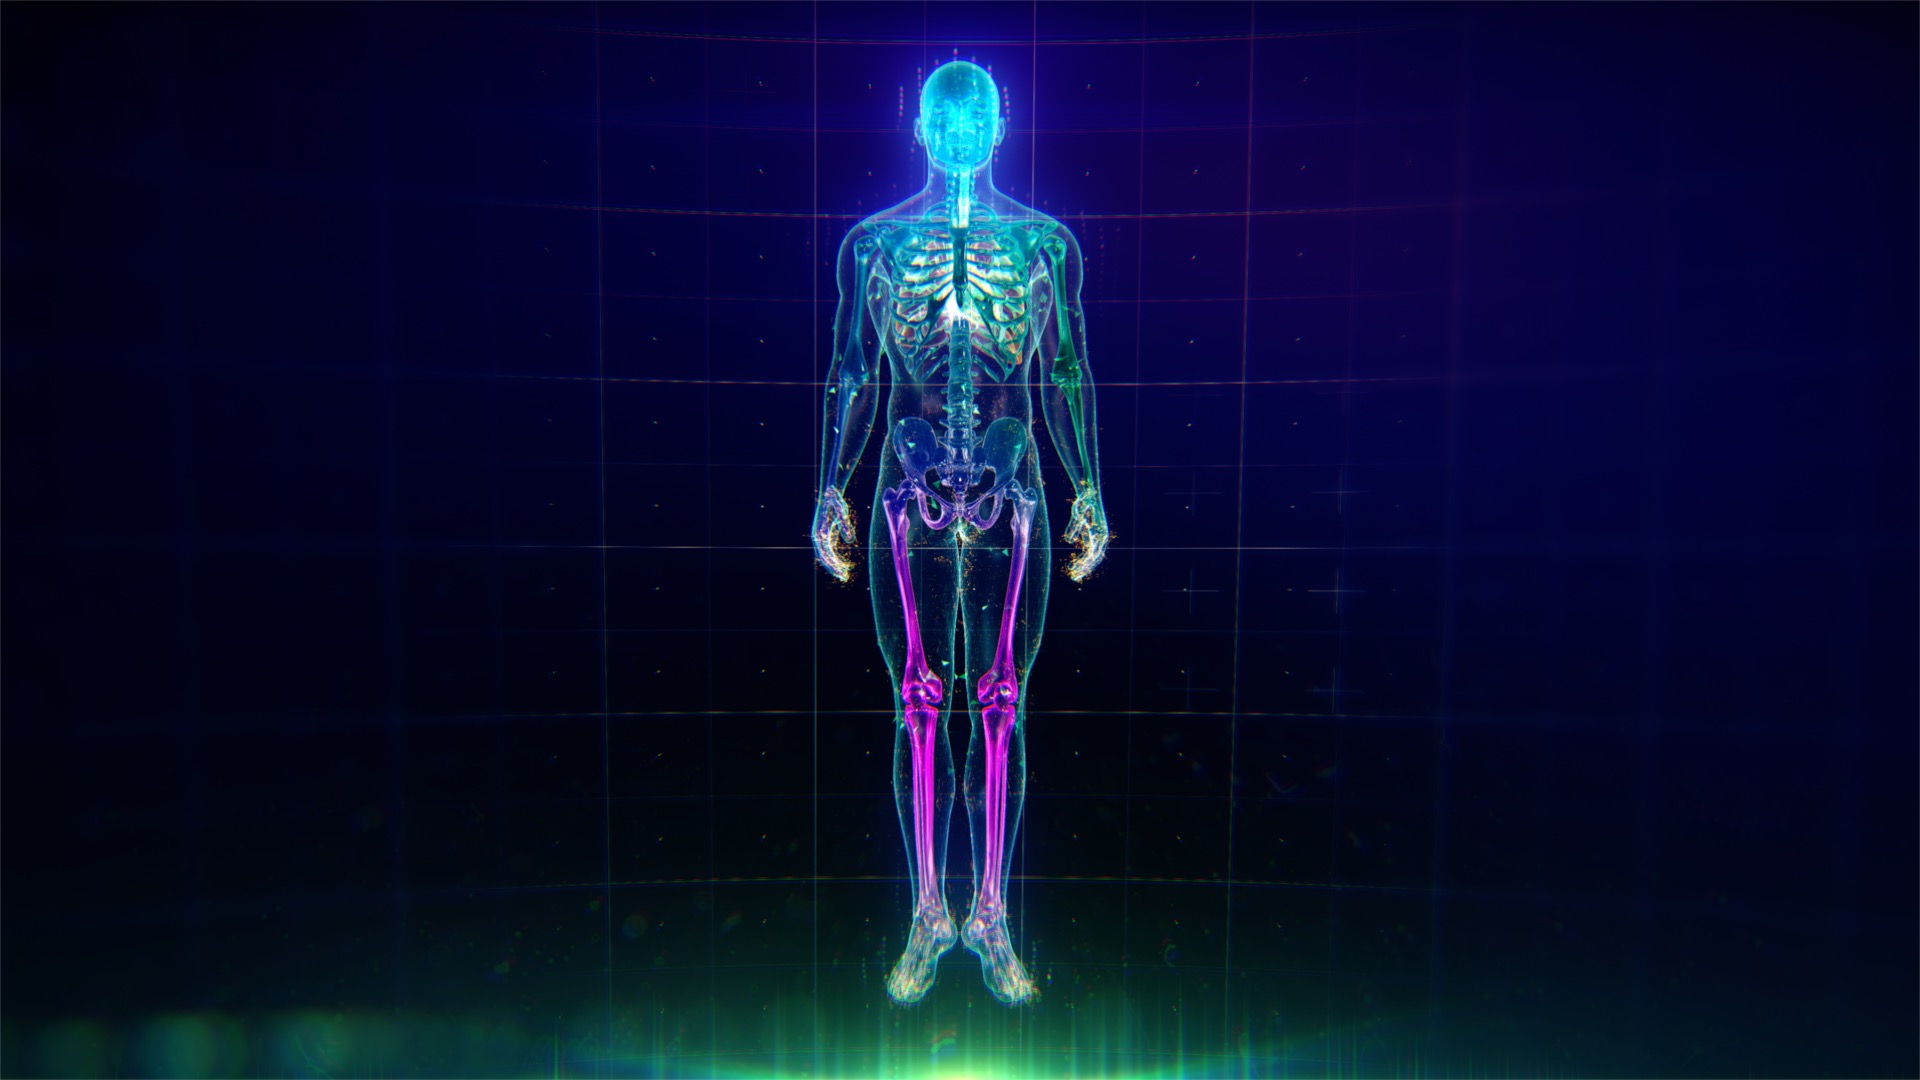 Colorful Human Body animation with flares and particles showing veins,  bones, organs and skin. Plexus. Futuristic and Artistic concept of human  anatomy. Full Body Circulatory System. 4K UHD